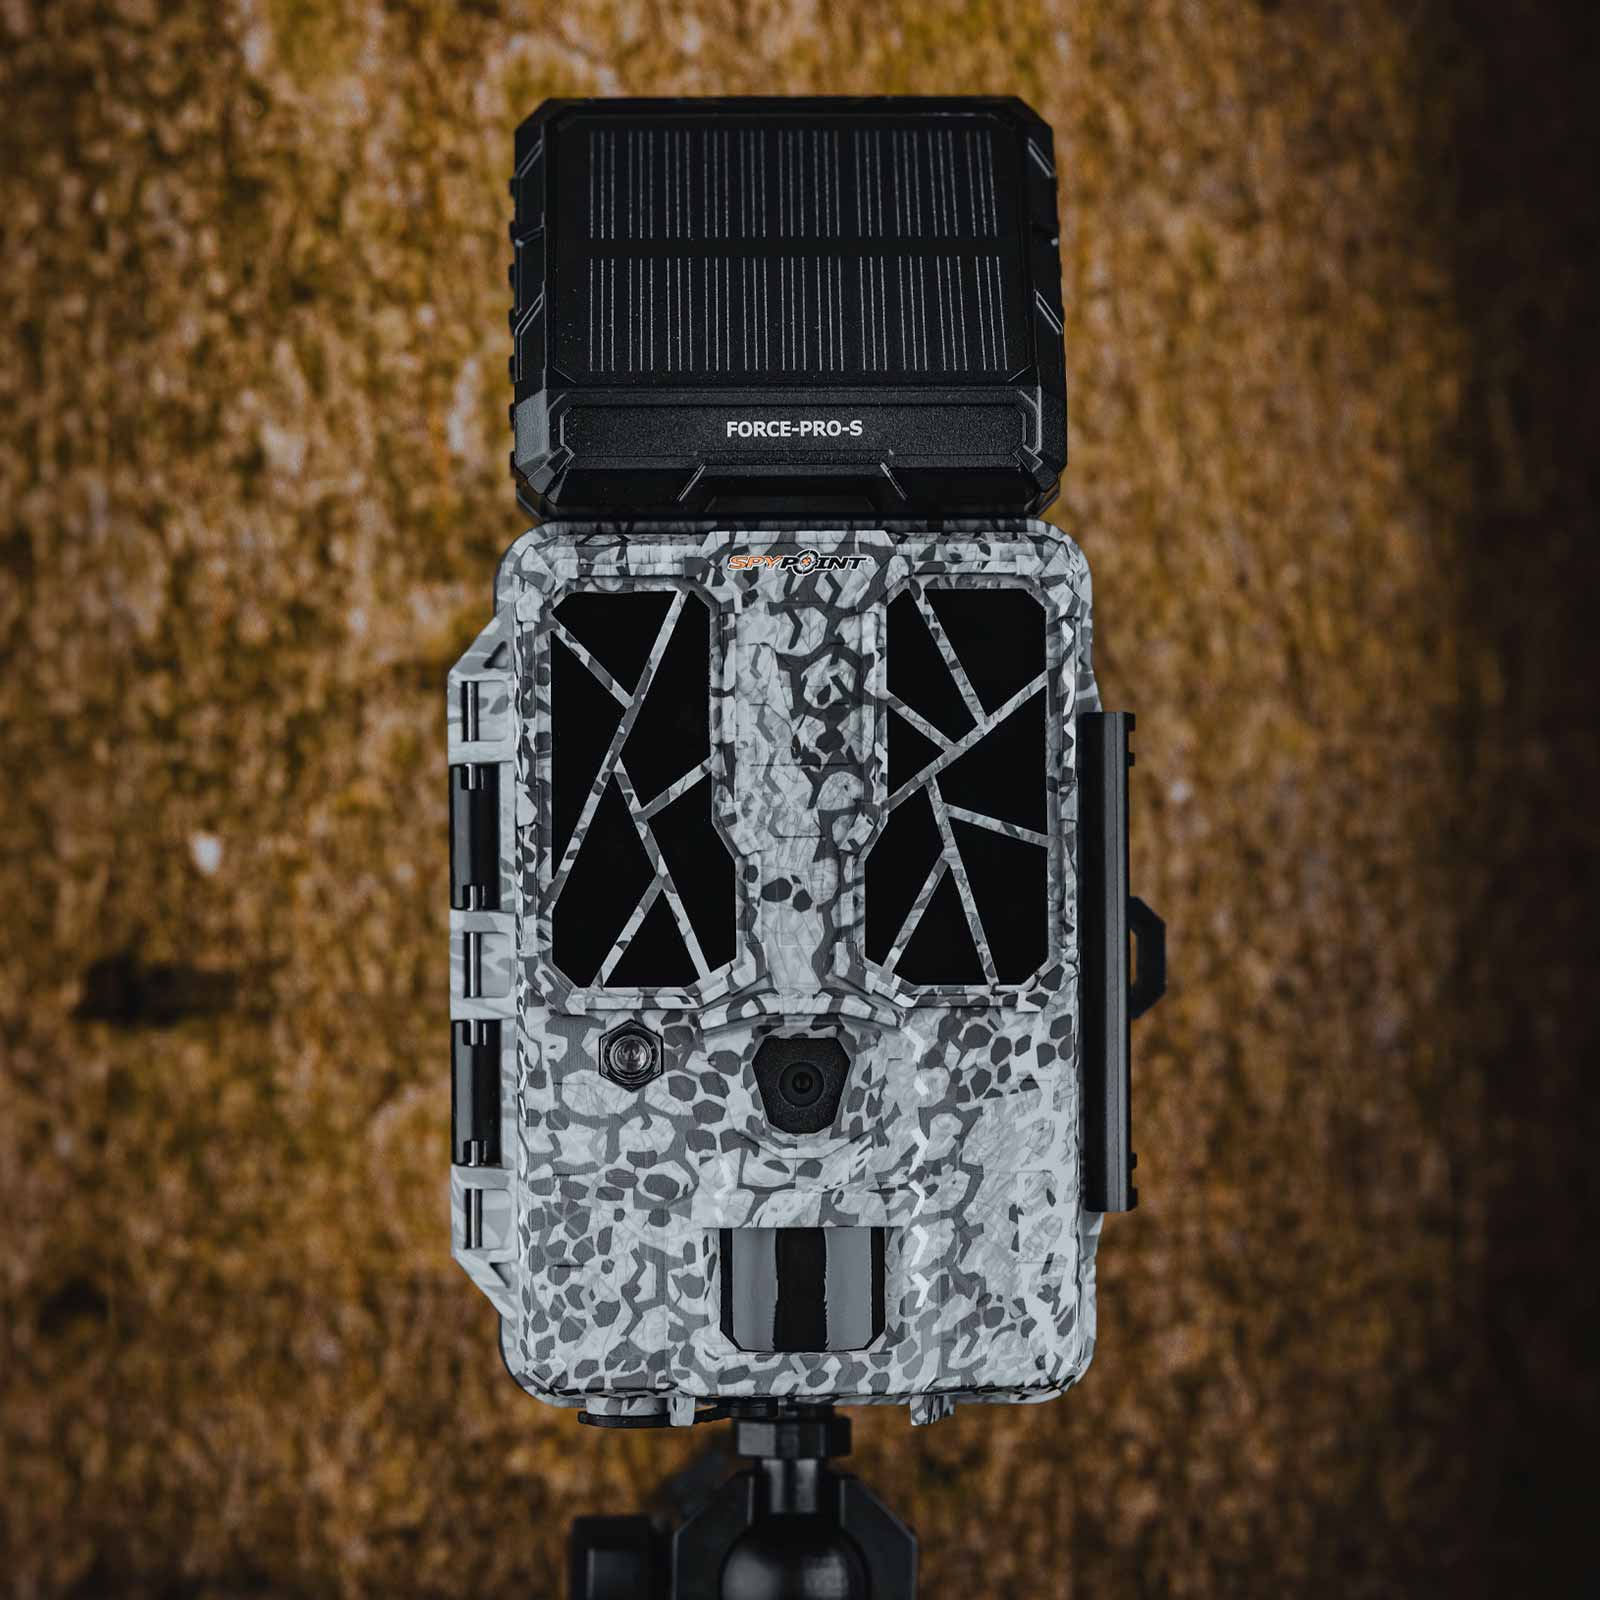 Spypoint Force-Pro-S Trail Camera